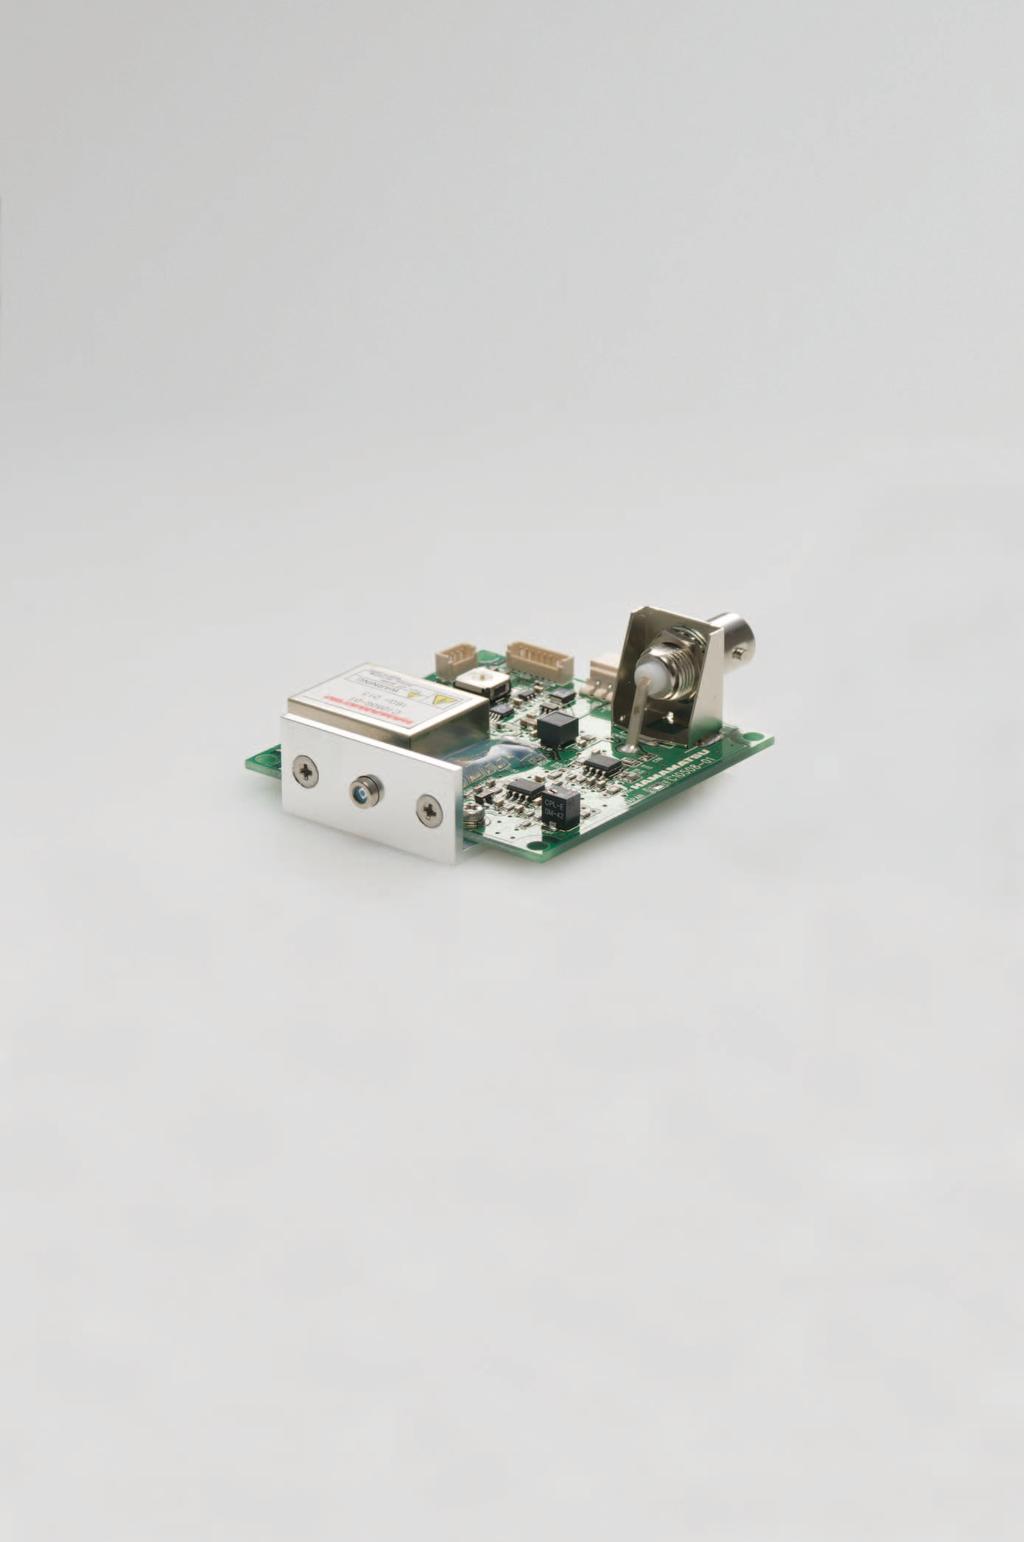 APD module C158-1 Variable gain, stable detection even at high gain The C158-1 consists of an APD, current-to-voltage converter, high-voltage power supply circuit as well as a microcontroller for